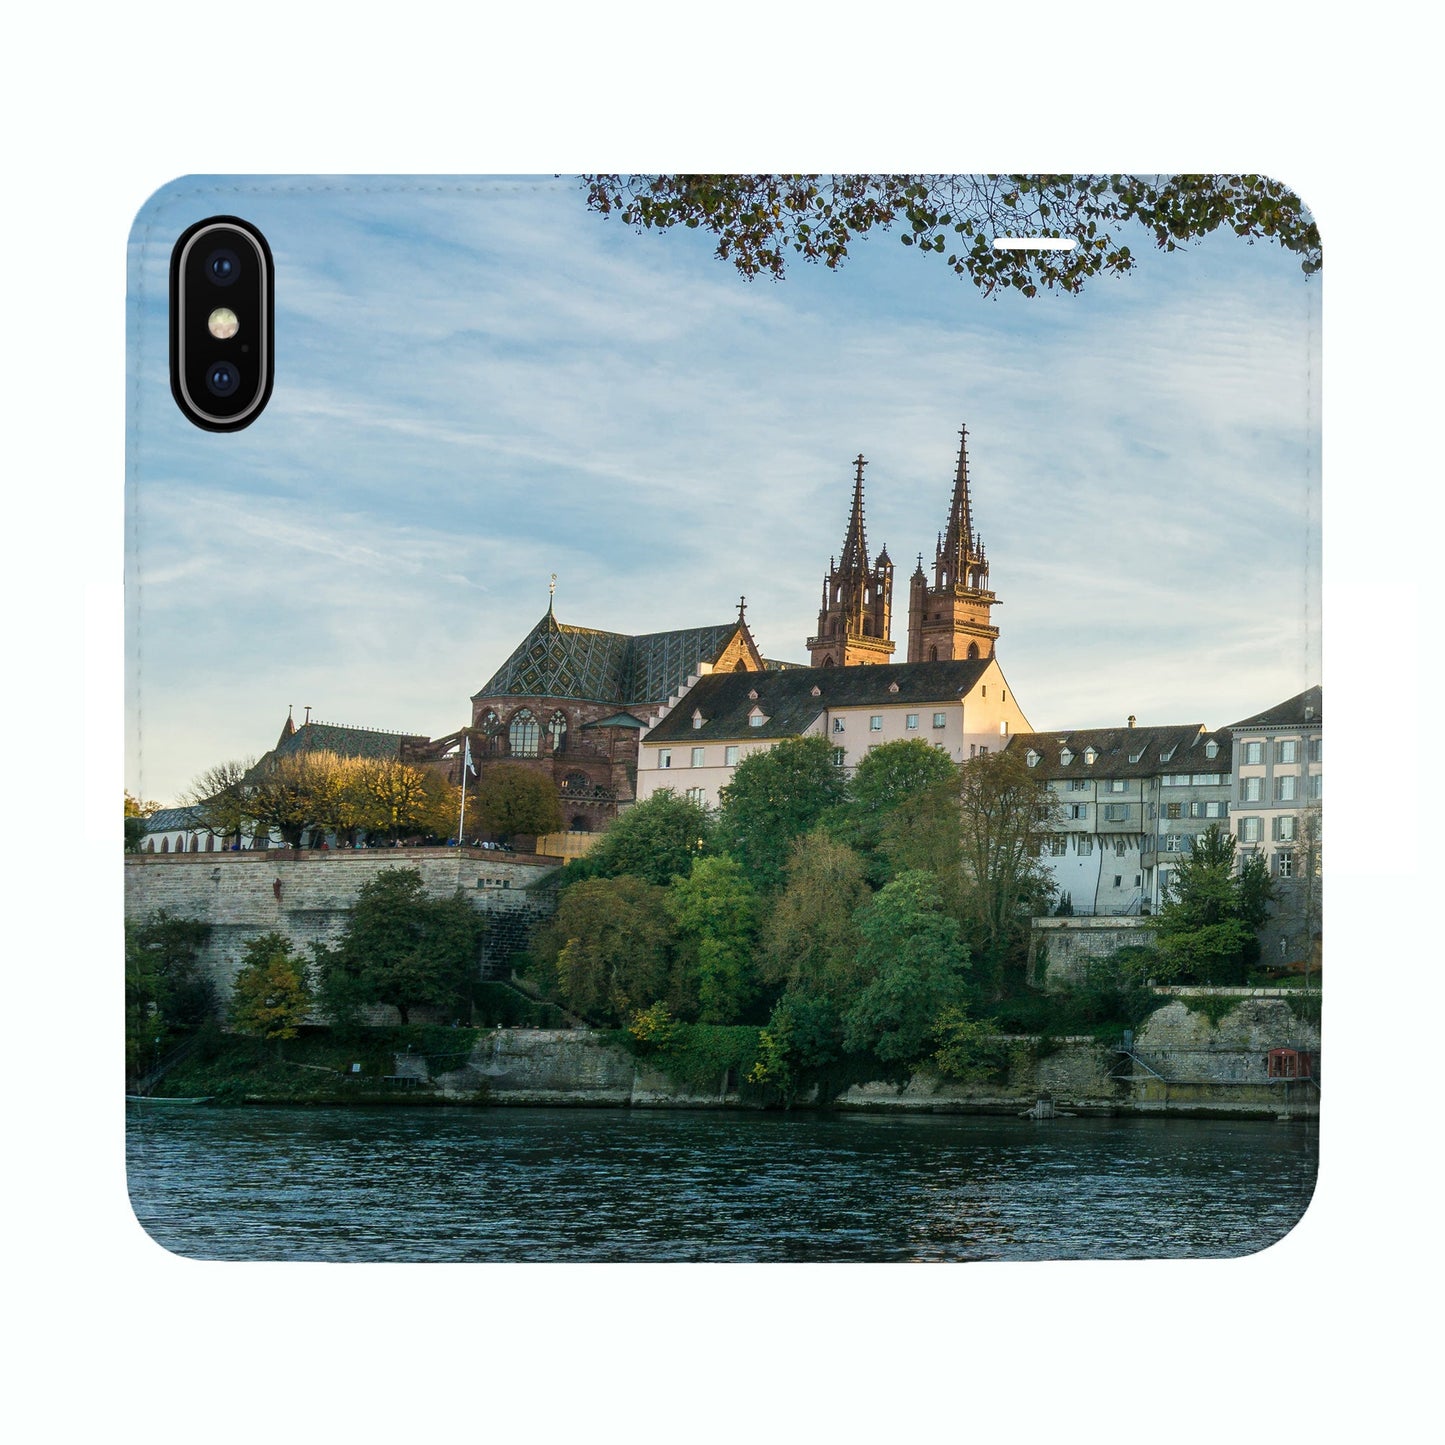 Basel City Rhine Panorama Case for iPhone XS Max